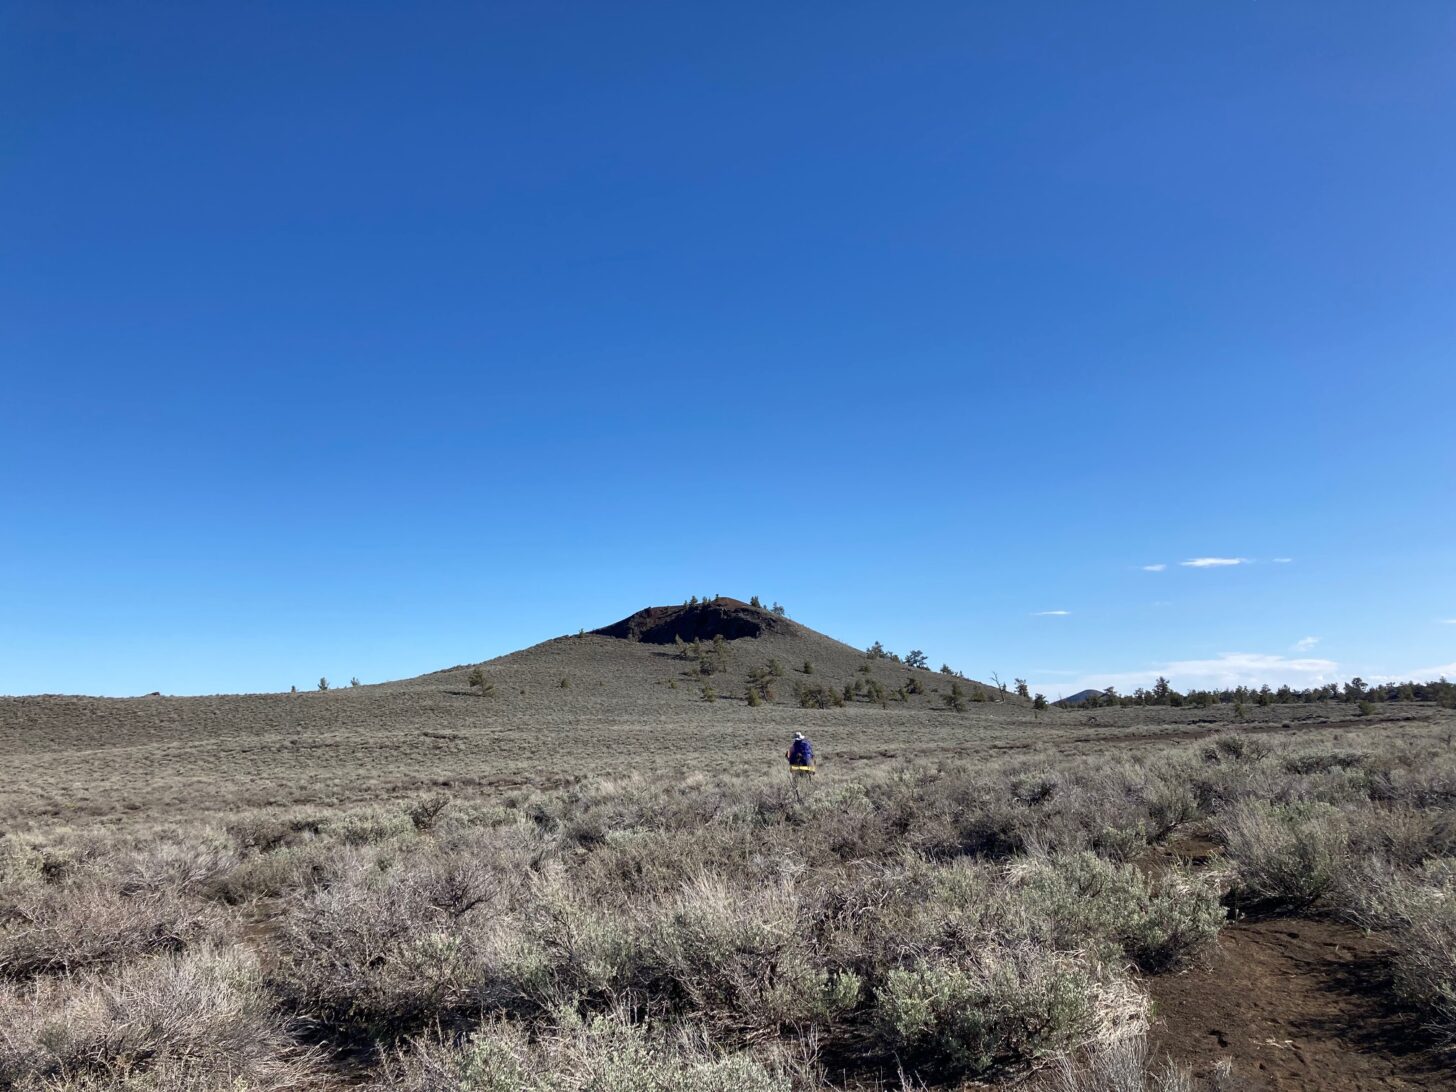 A hiker travels through sagebrush toward a conical hill in the distance with blue sky above.